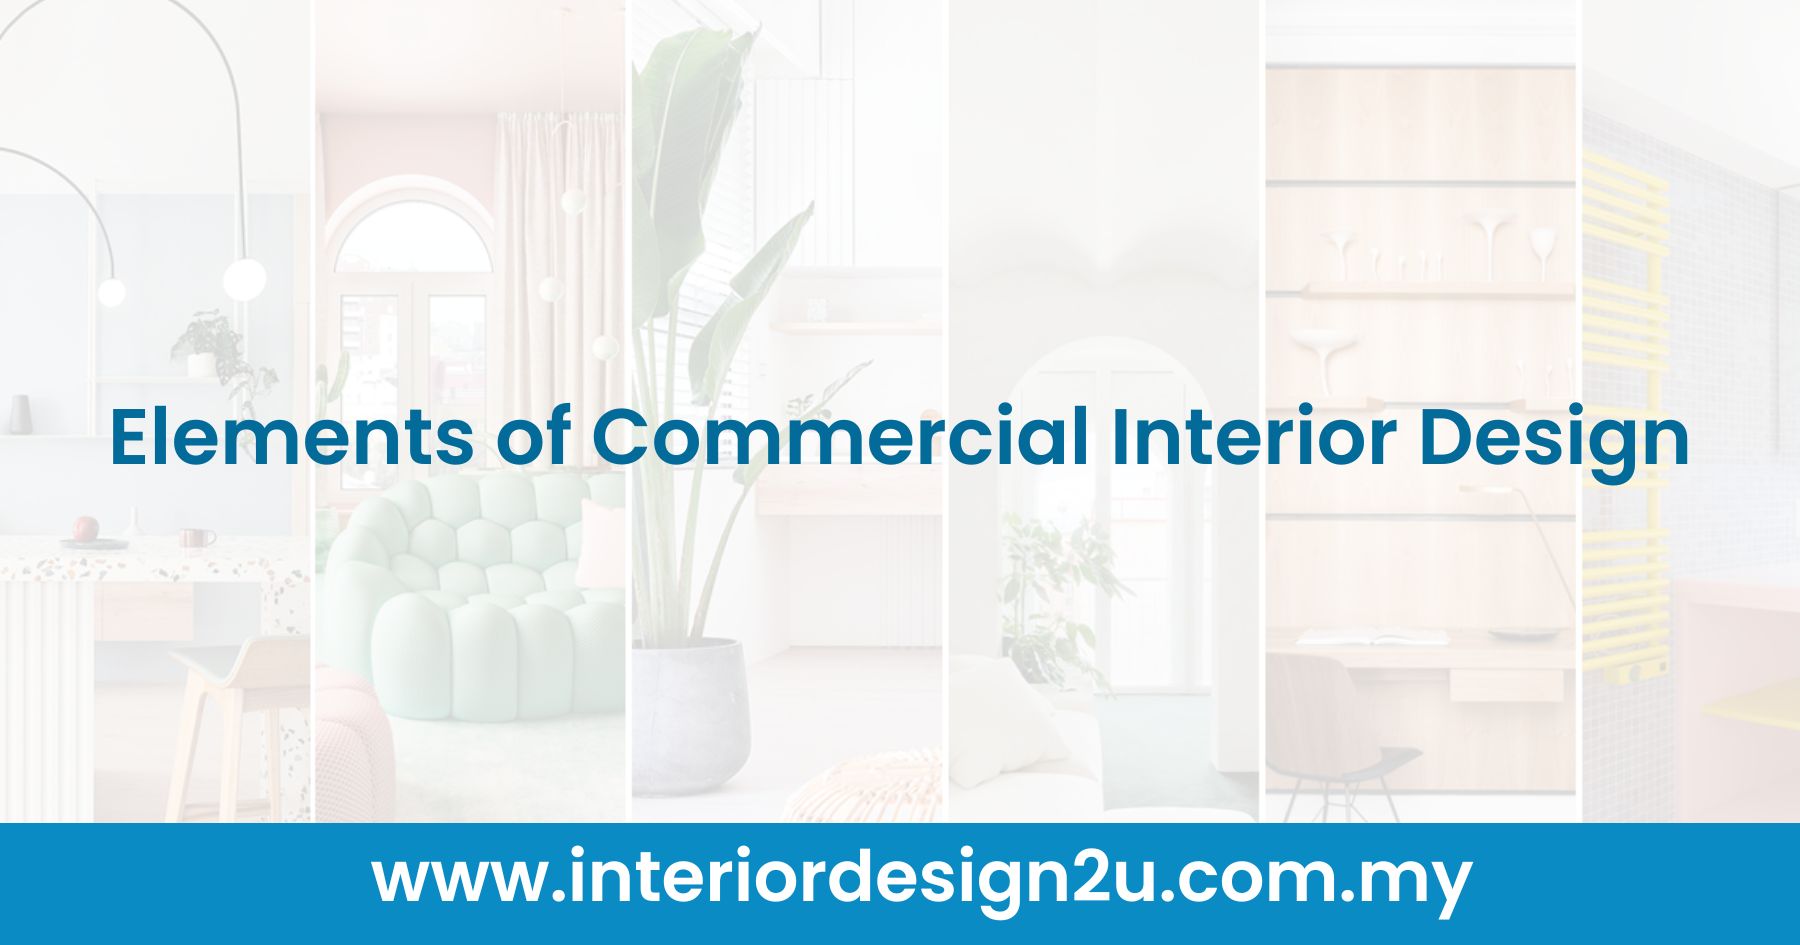 Elements of Commercial Interior Design